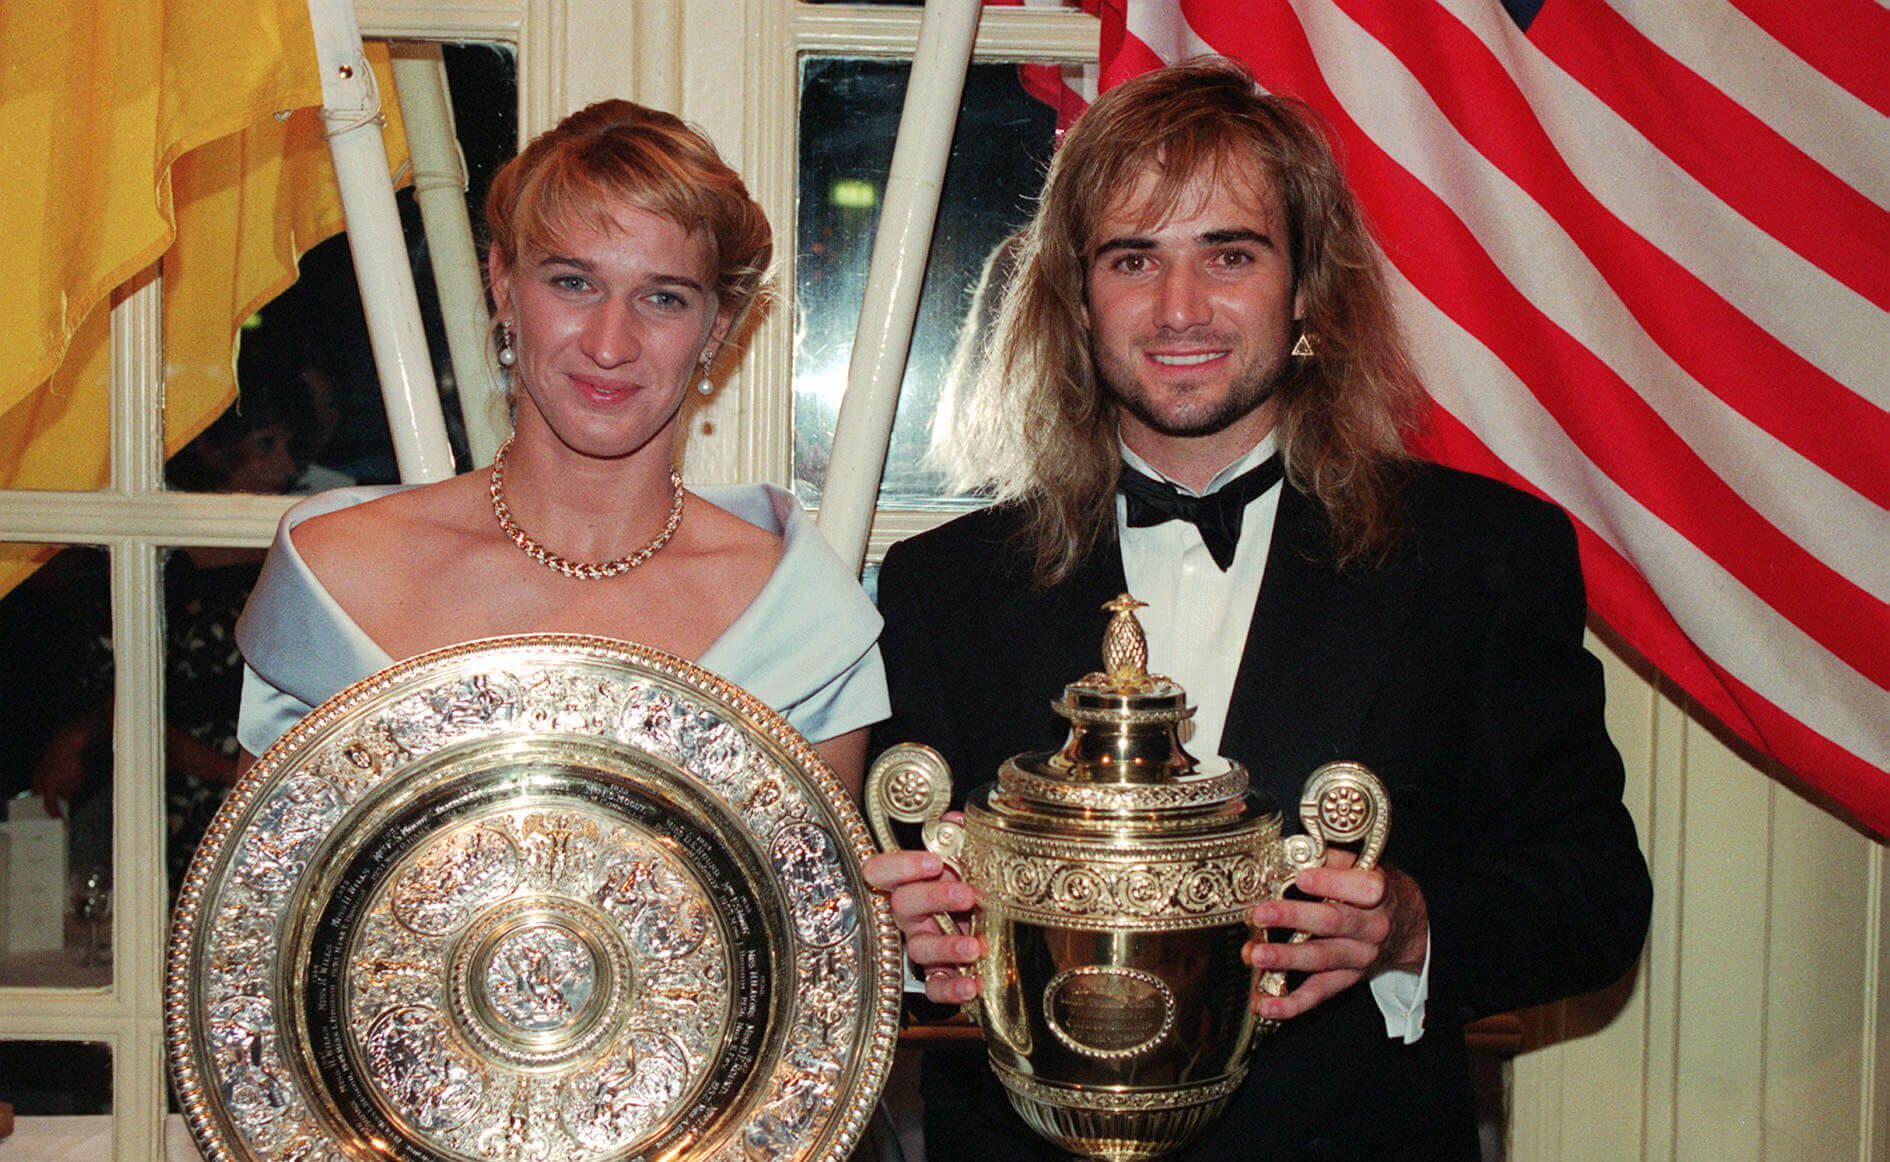 Tennis film charting Agassi and Graf's relationship to premiere in June